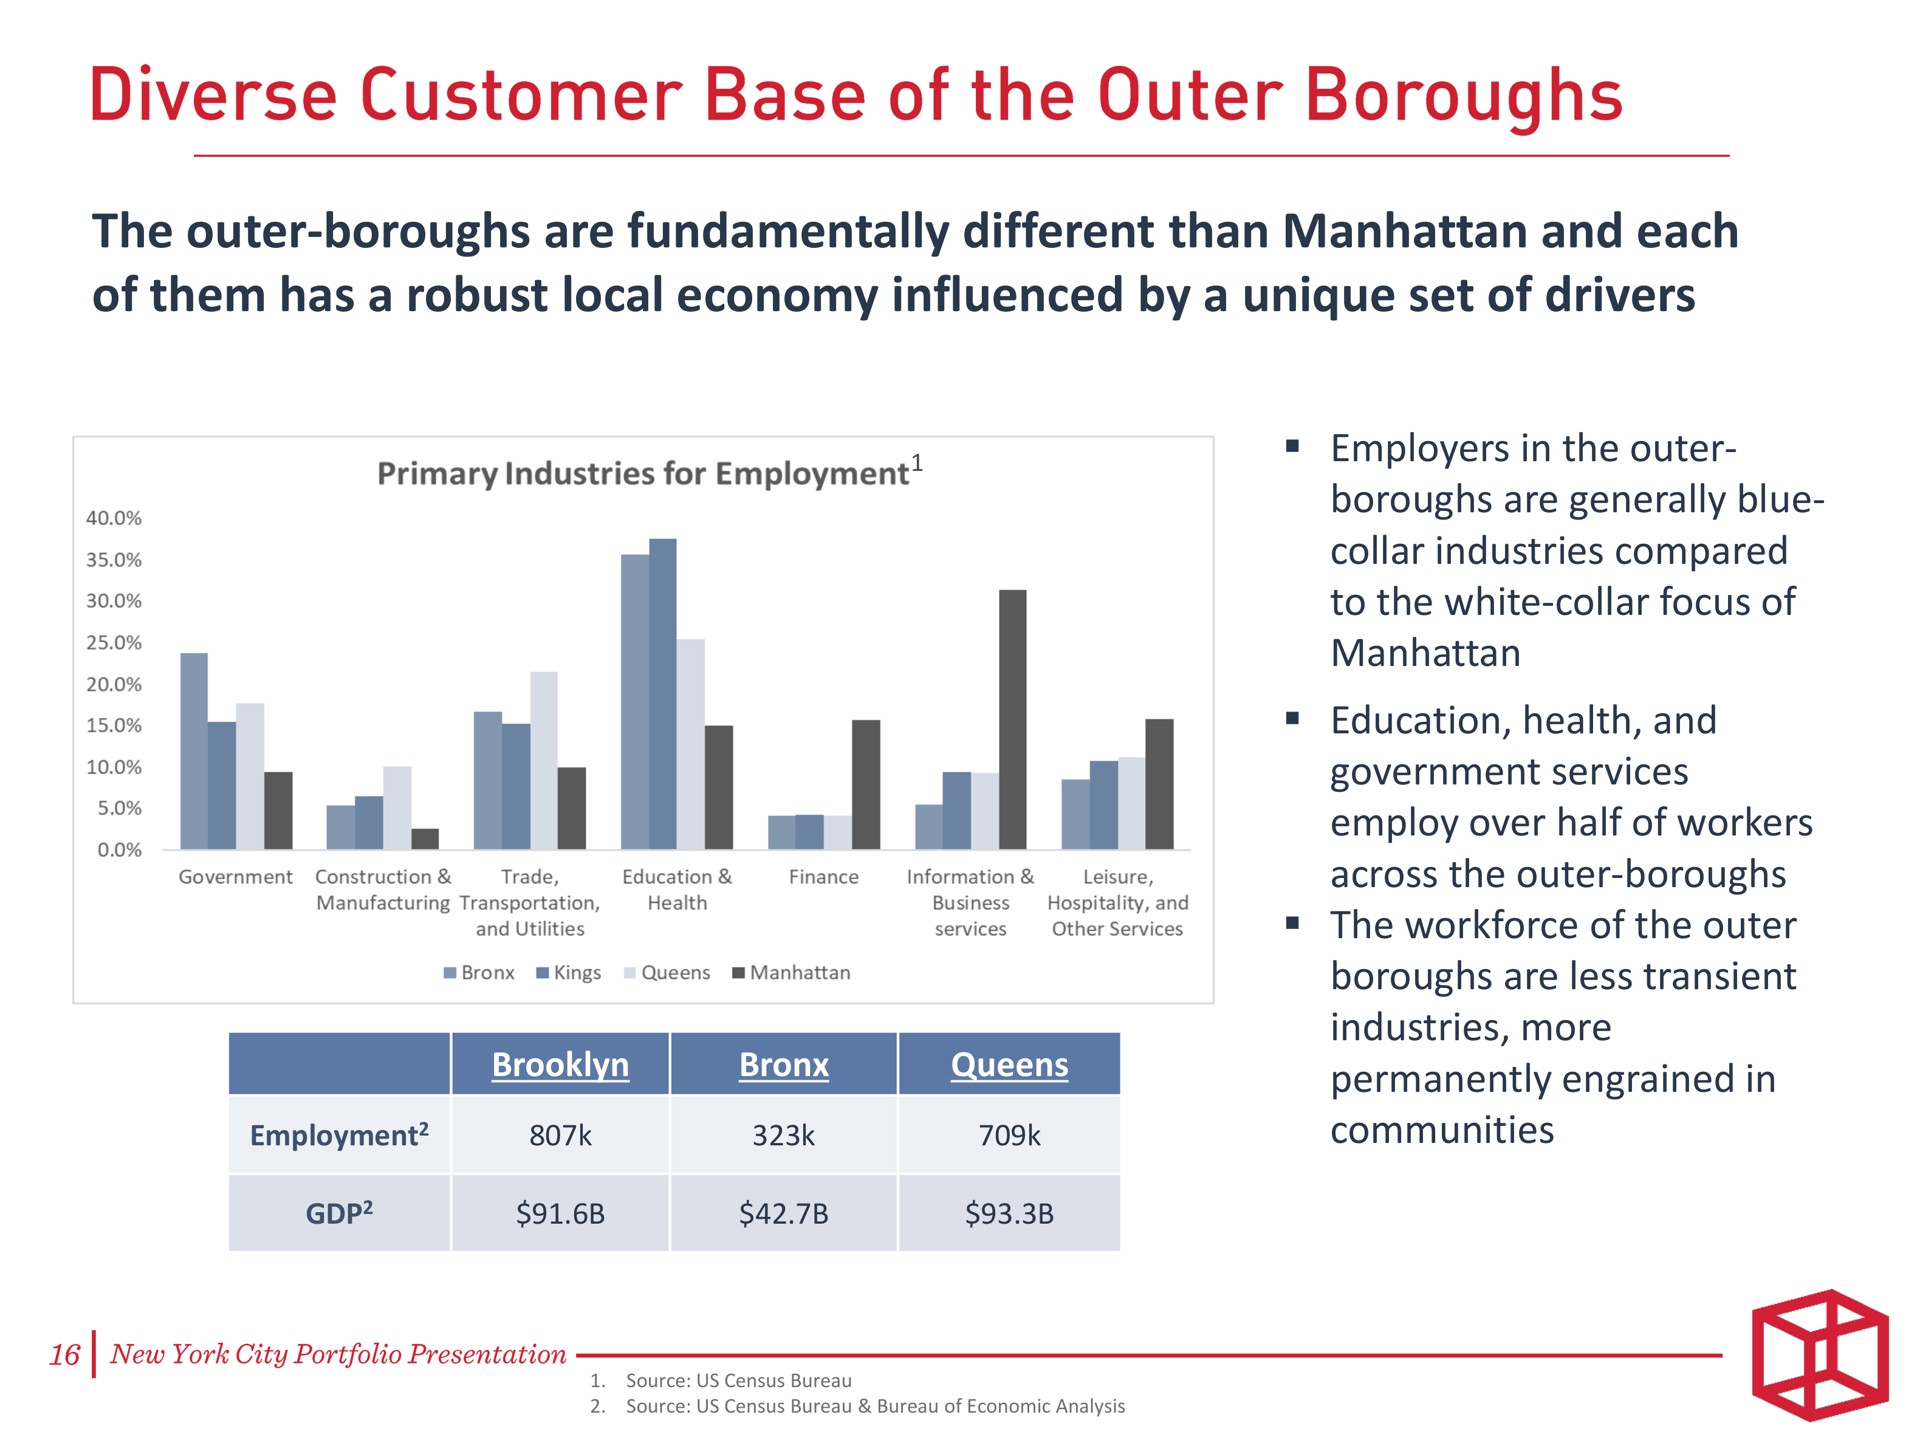 the outer boroughs are fundamentally different than and each of them has a robust local economy influenced by a unique set of drivers diverse customer base outer boroughs | CubeSmart